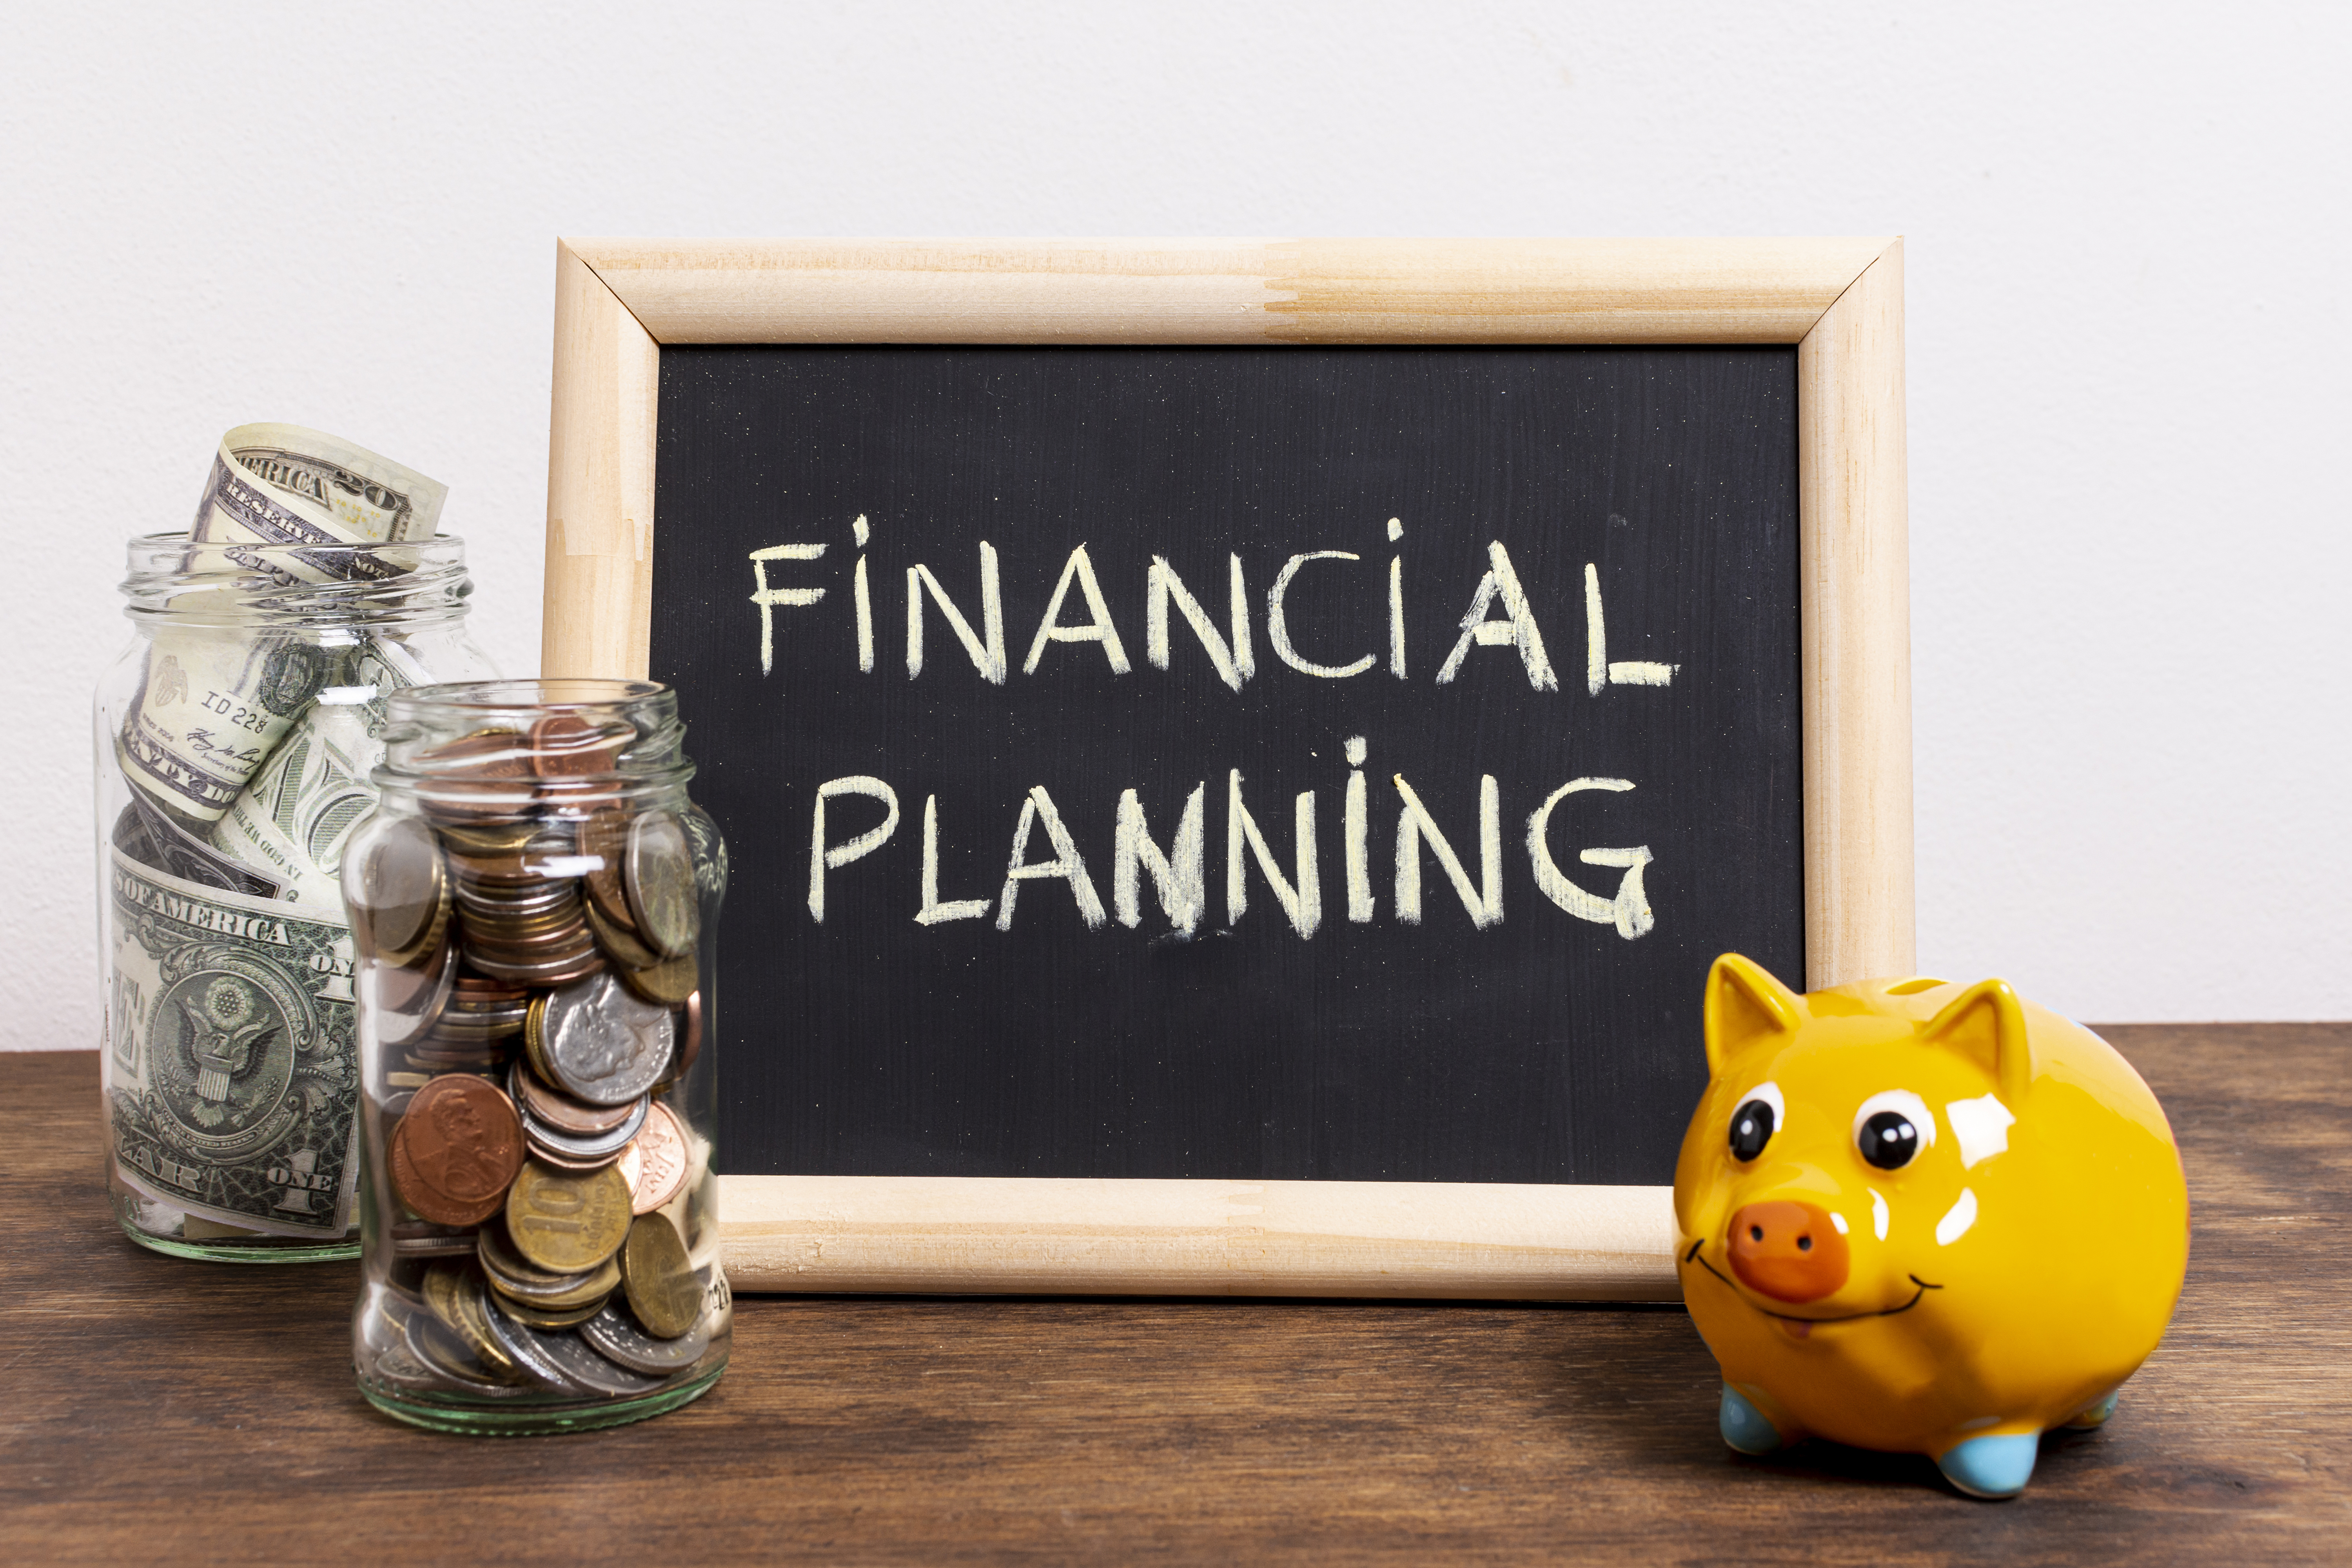 Start The Financial Year Off Right With These 3 Tips